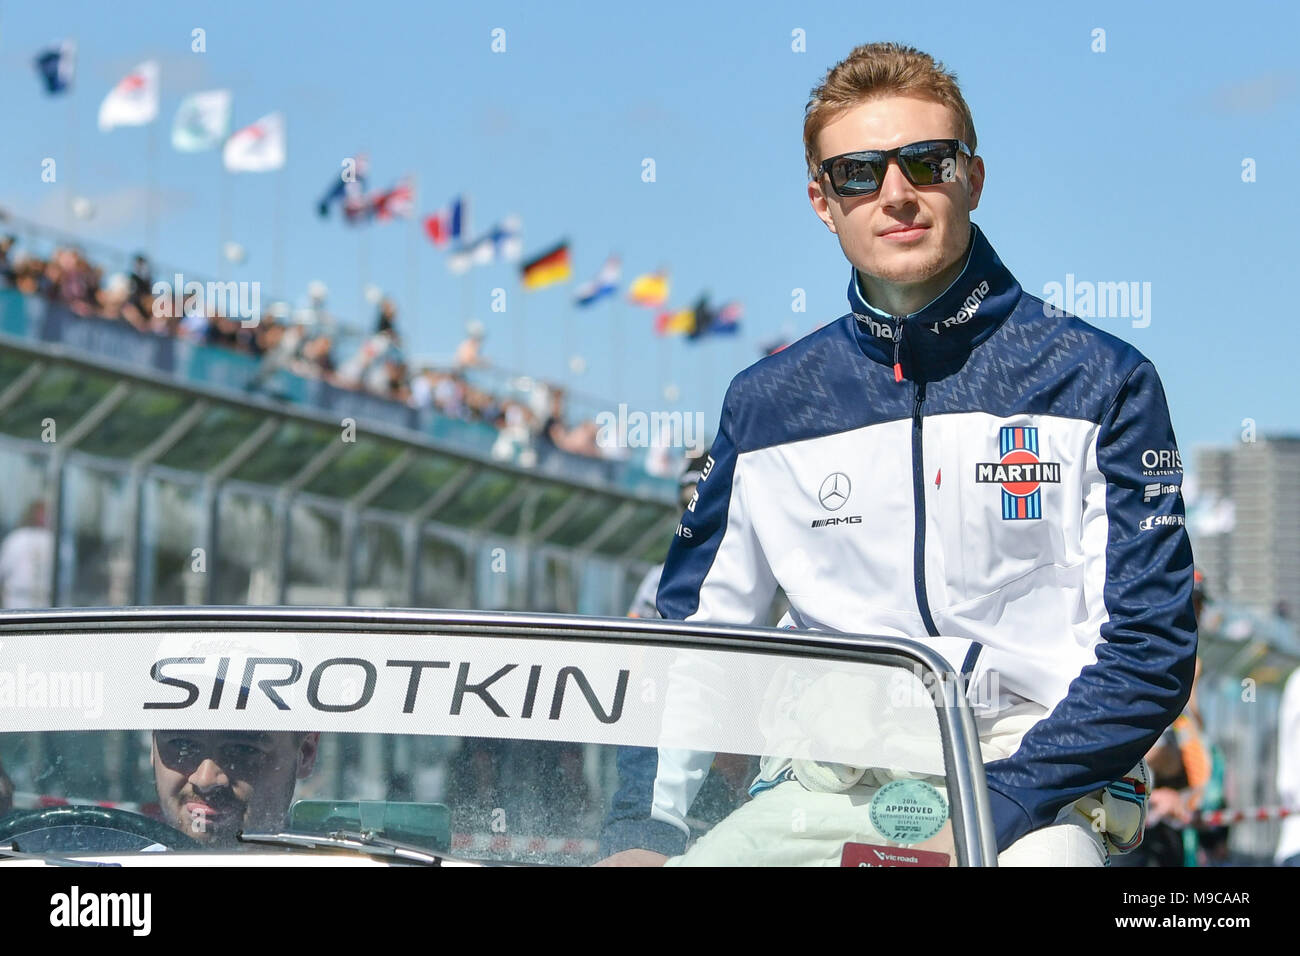 Albert Park, Melbourne, Australia. 25th Mar, 2018. Sergey Sirotkin (RUS) #35 from the Williams Martini Racing team waves to the crowd during the drivers' parade at the 2018 Australian Formula One Grand Prix at Albert Park, Melbourne, Australia. Sydney Low/Cal Sport Media/Alamy Live News Stock Photo